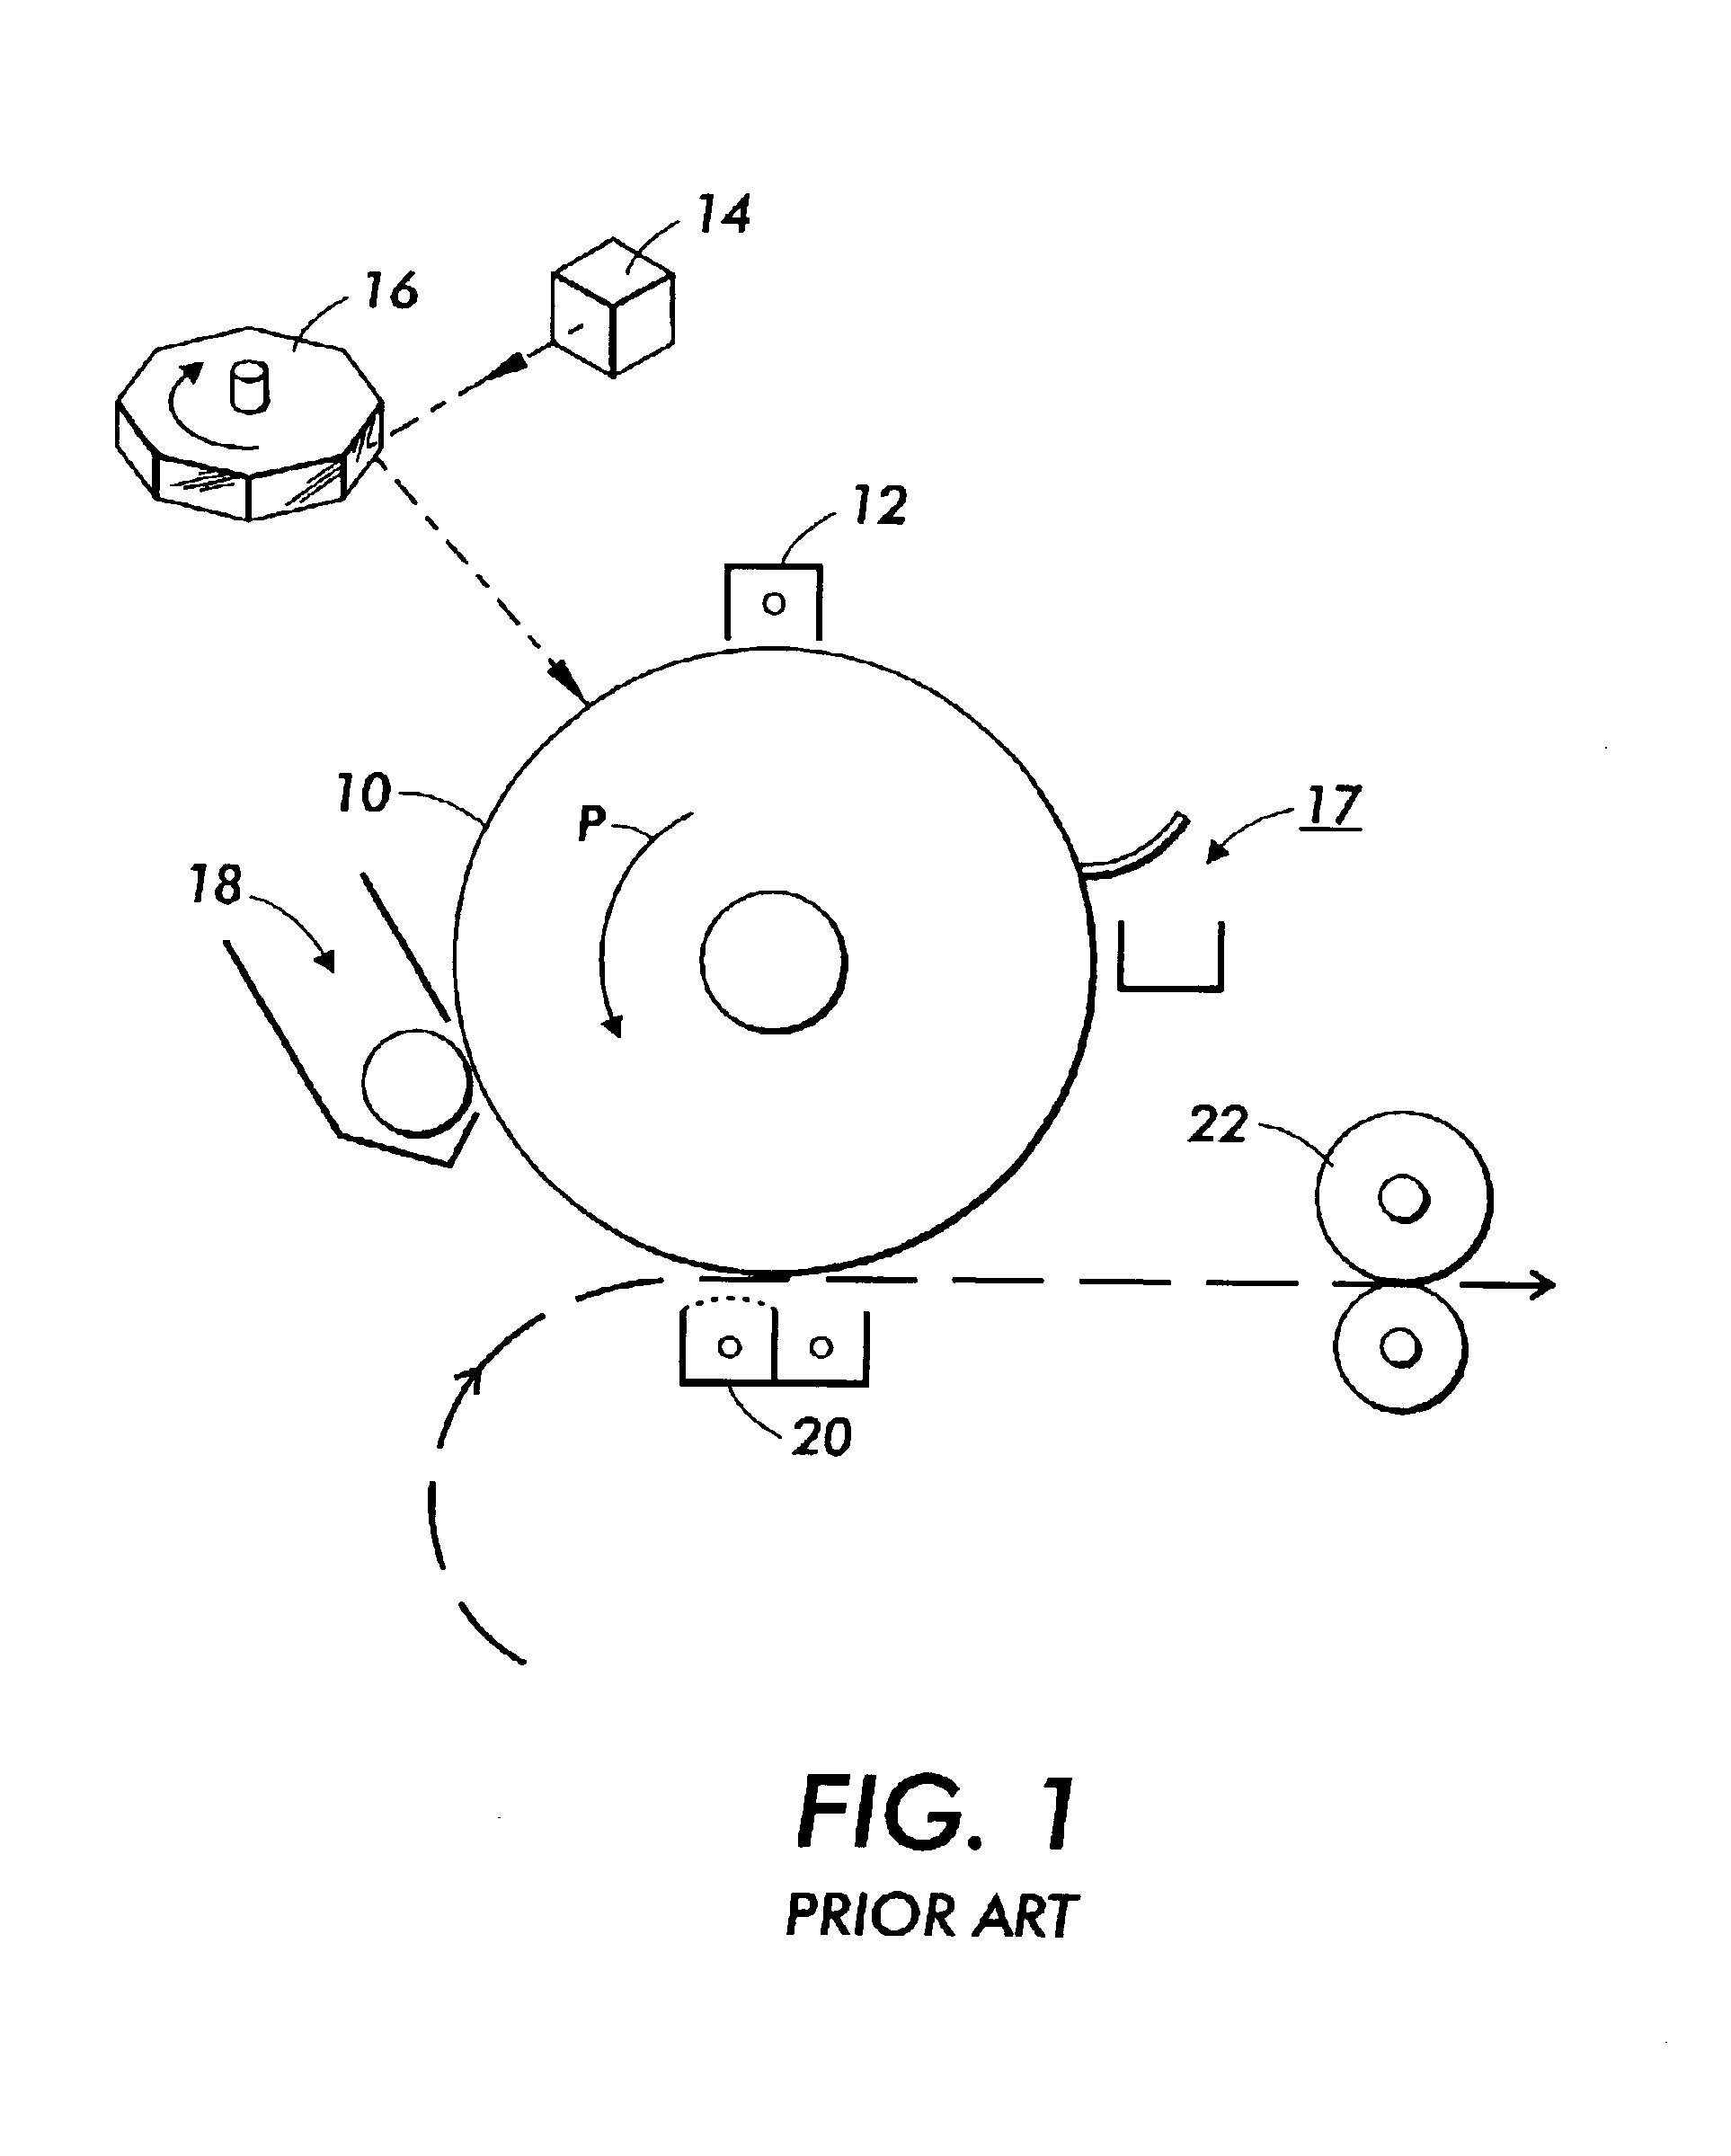 Xerographic printing system with magnetic seal between development and transfer